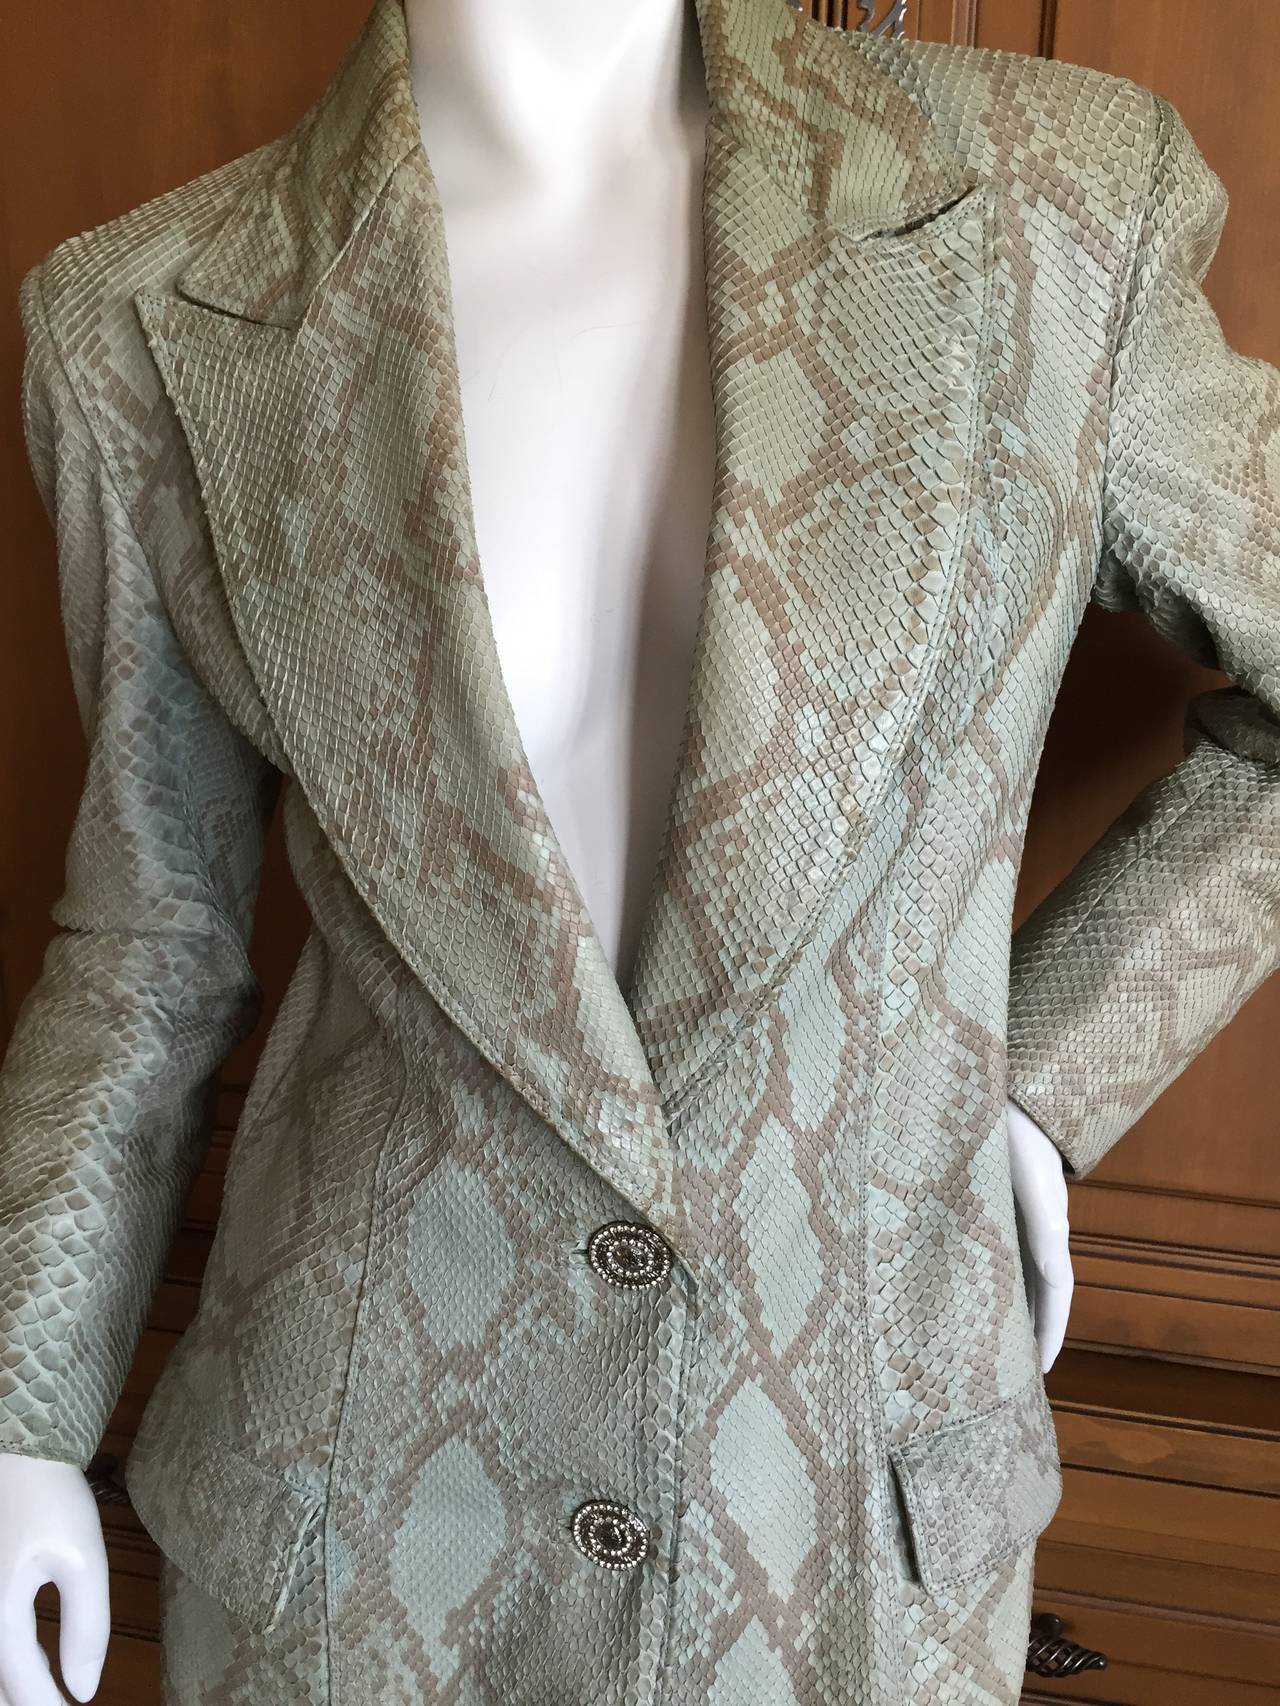 Gianni Versace Couture VIntage Genuine Python Jacket / Coat circa 1990
This is a wonderful vintage Versace, lined in Medusa pattern fabric with crystal Medusa

  
BUST:	34 in. (86 cm)
WAIST:	28 in. (71 cm)
LENGTH:	37 in.